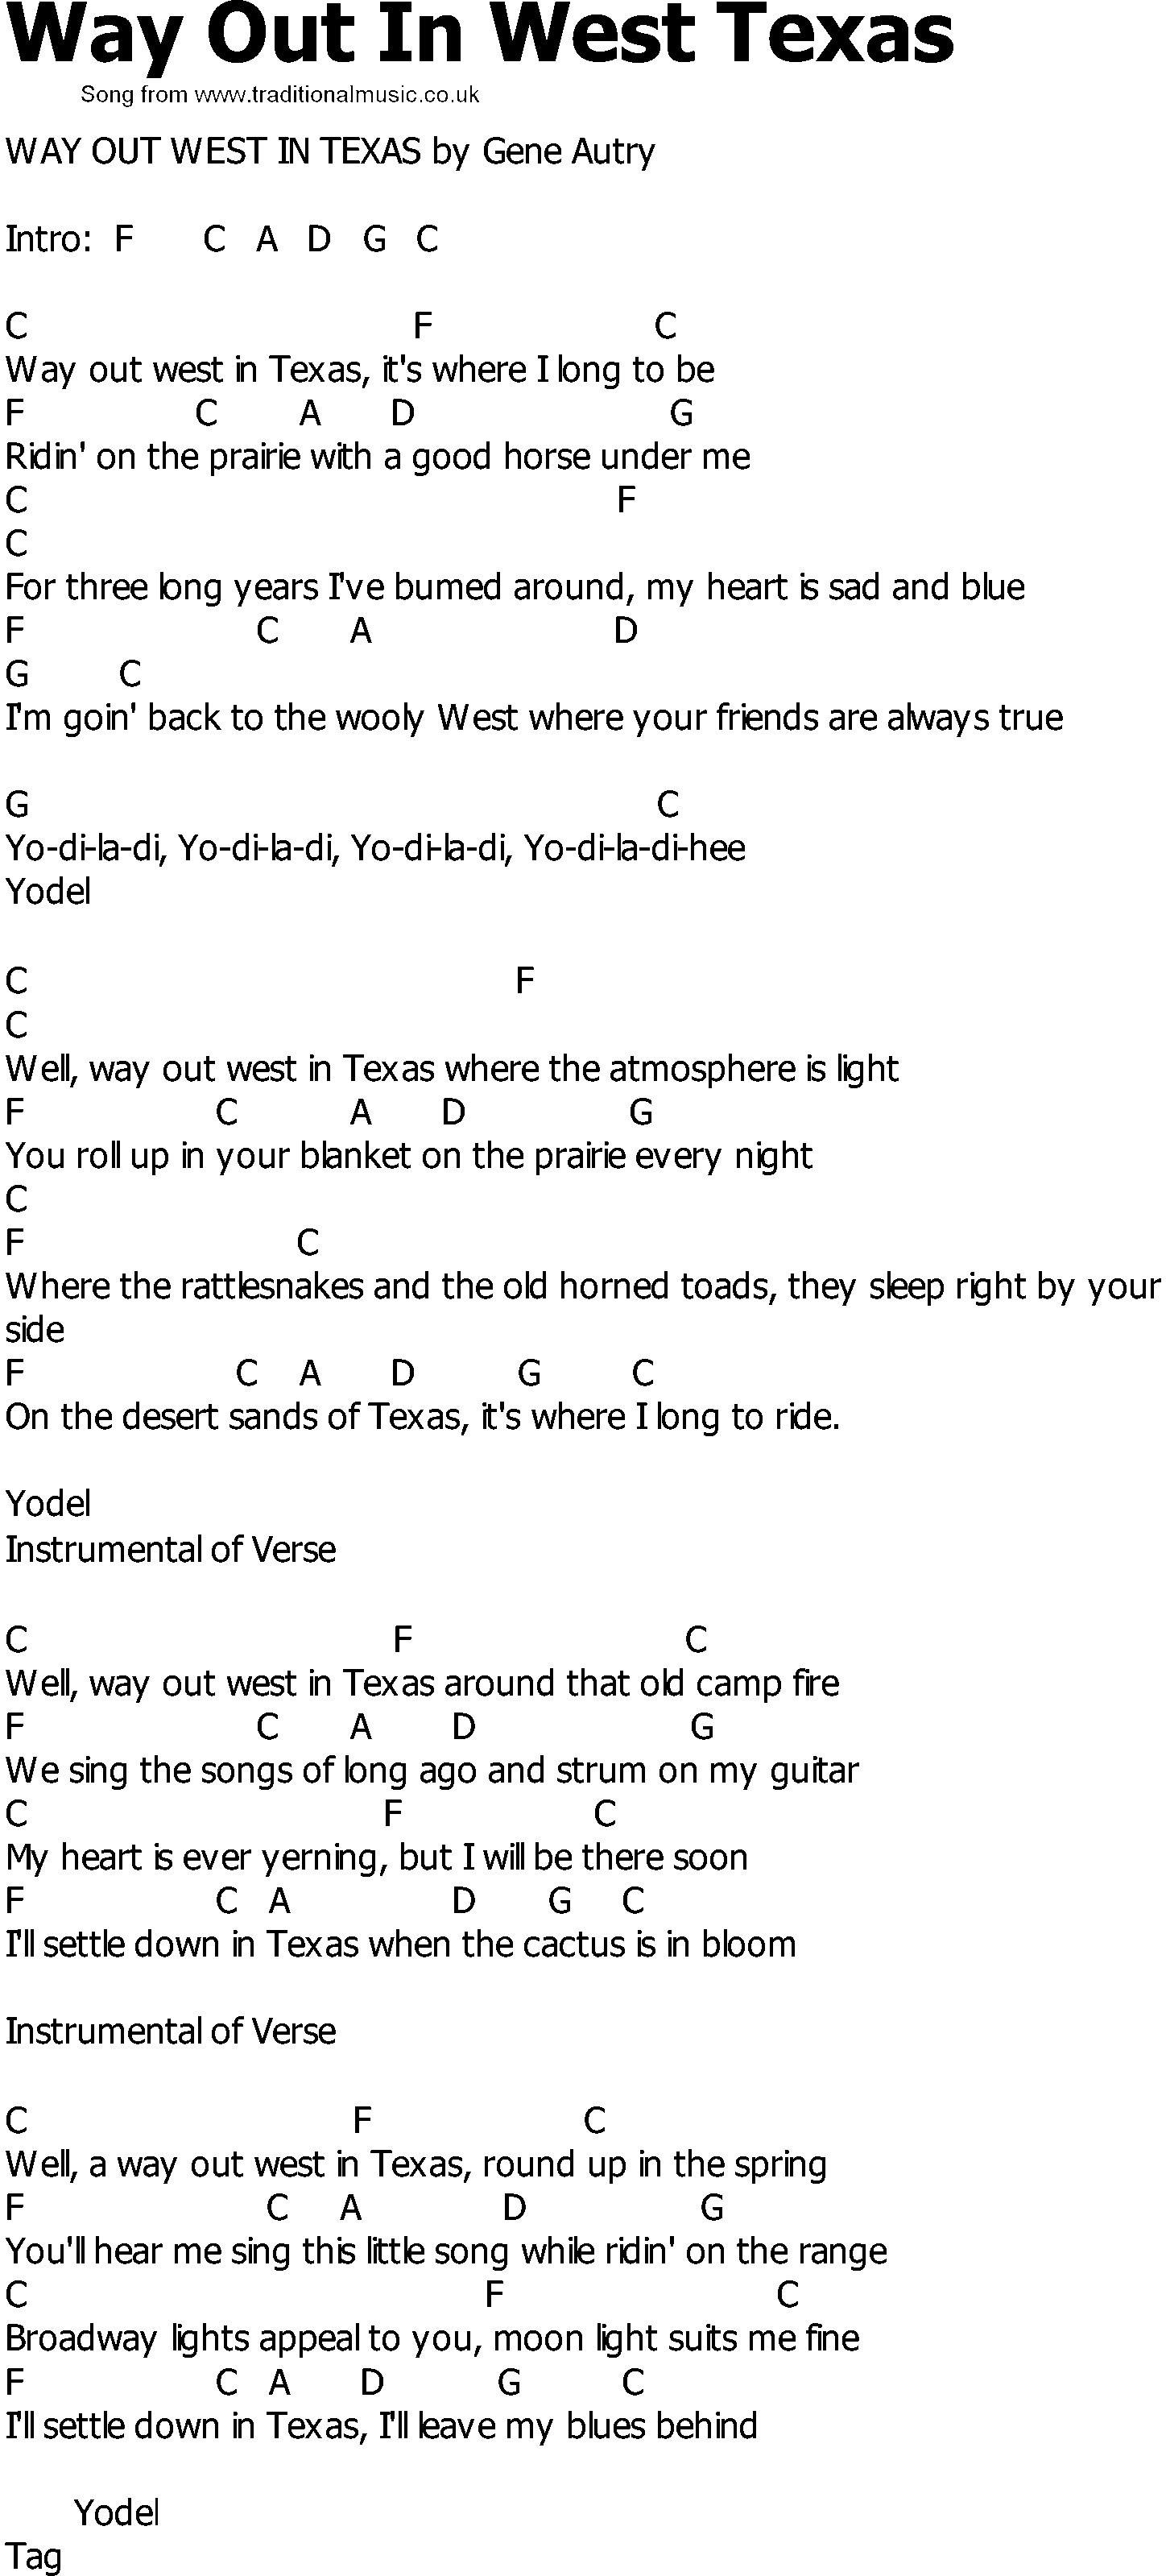 Old Country song lyrics with chords - Way Out In West Texas